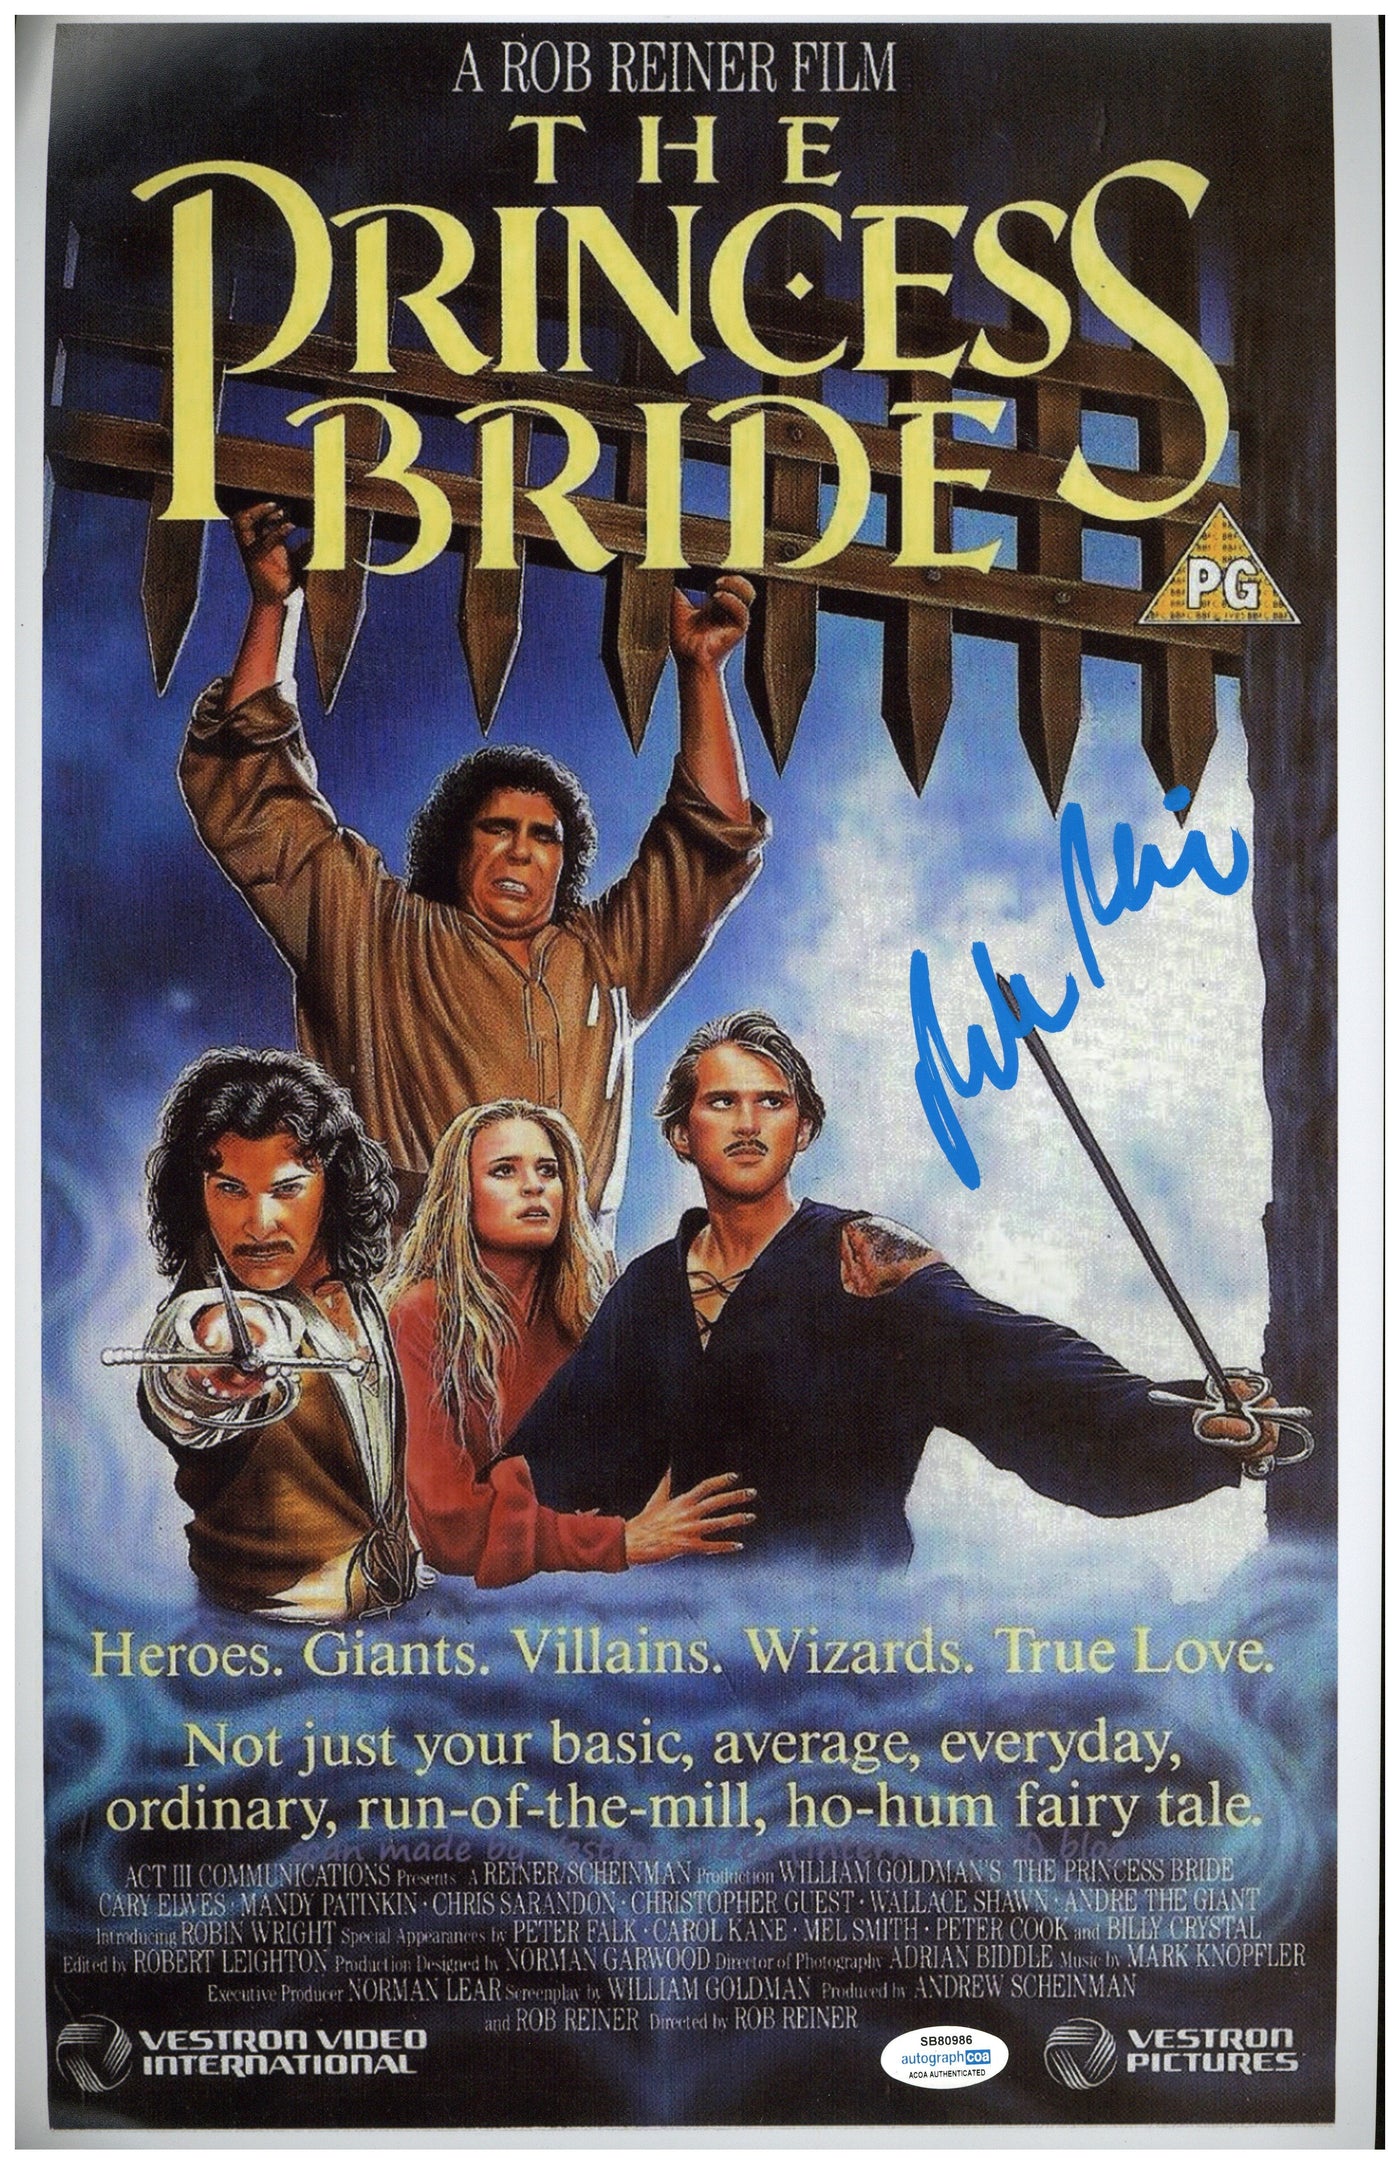 Rob Reiner Signed 11x17 Photo The Princess Bride Authentic Autographed ACOA